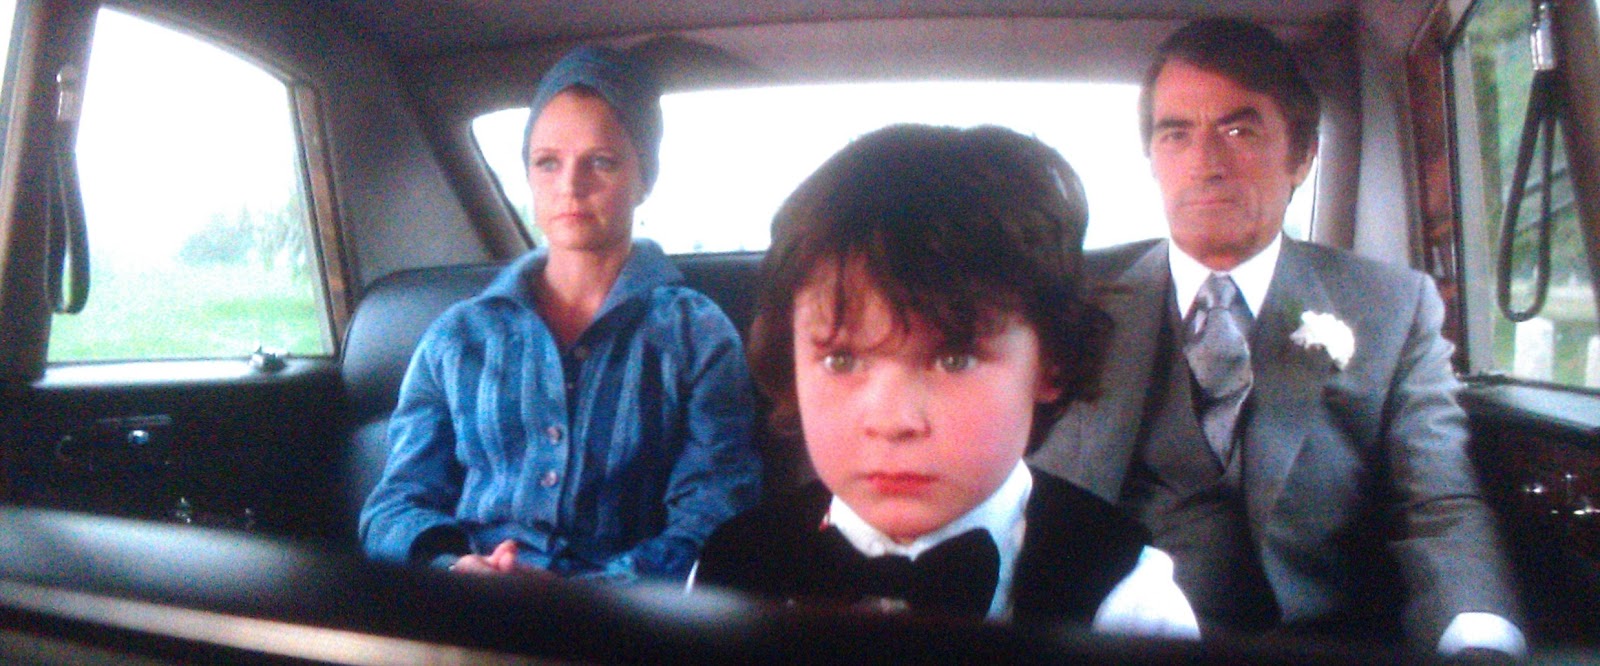 video review : The Omen